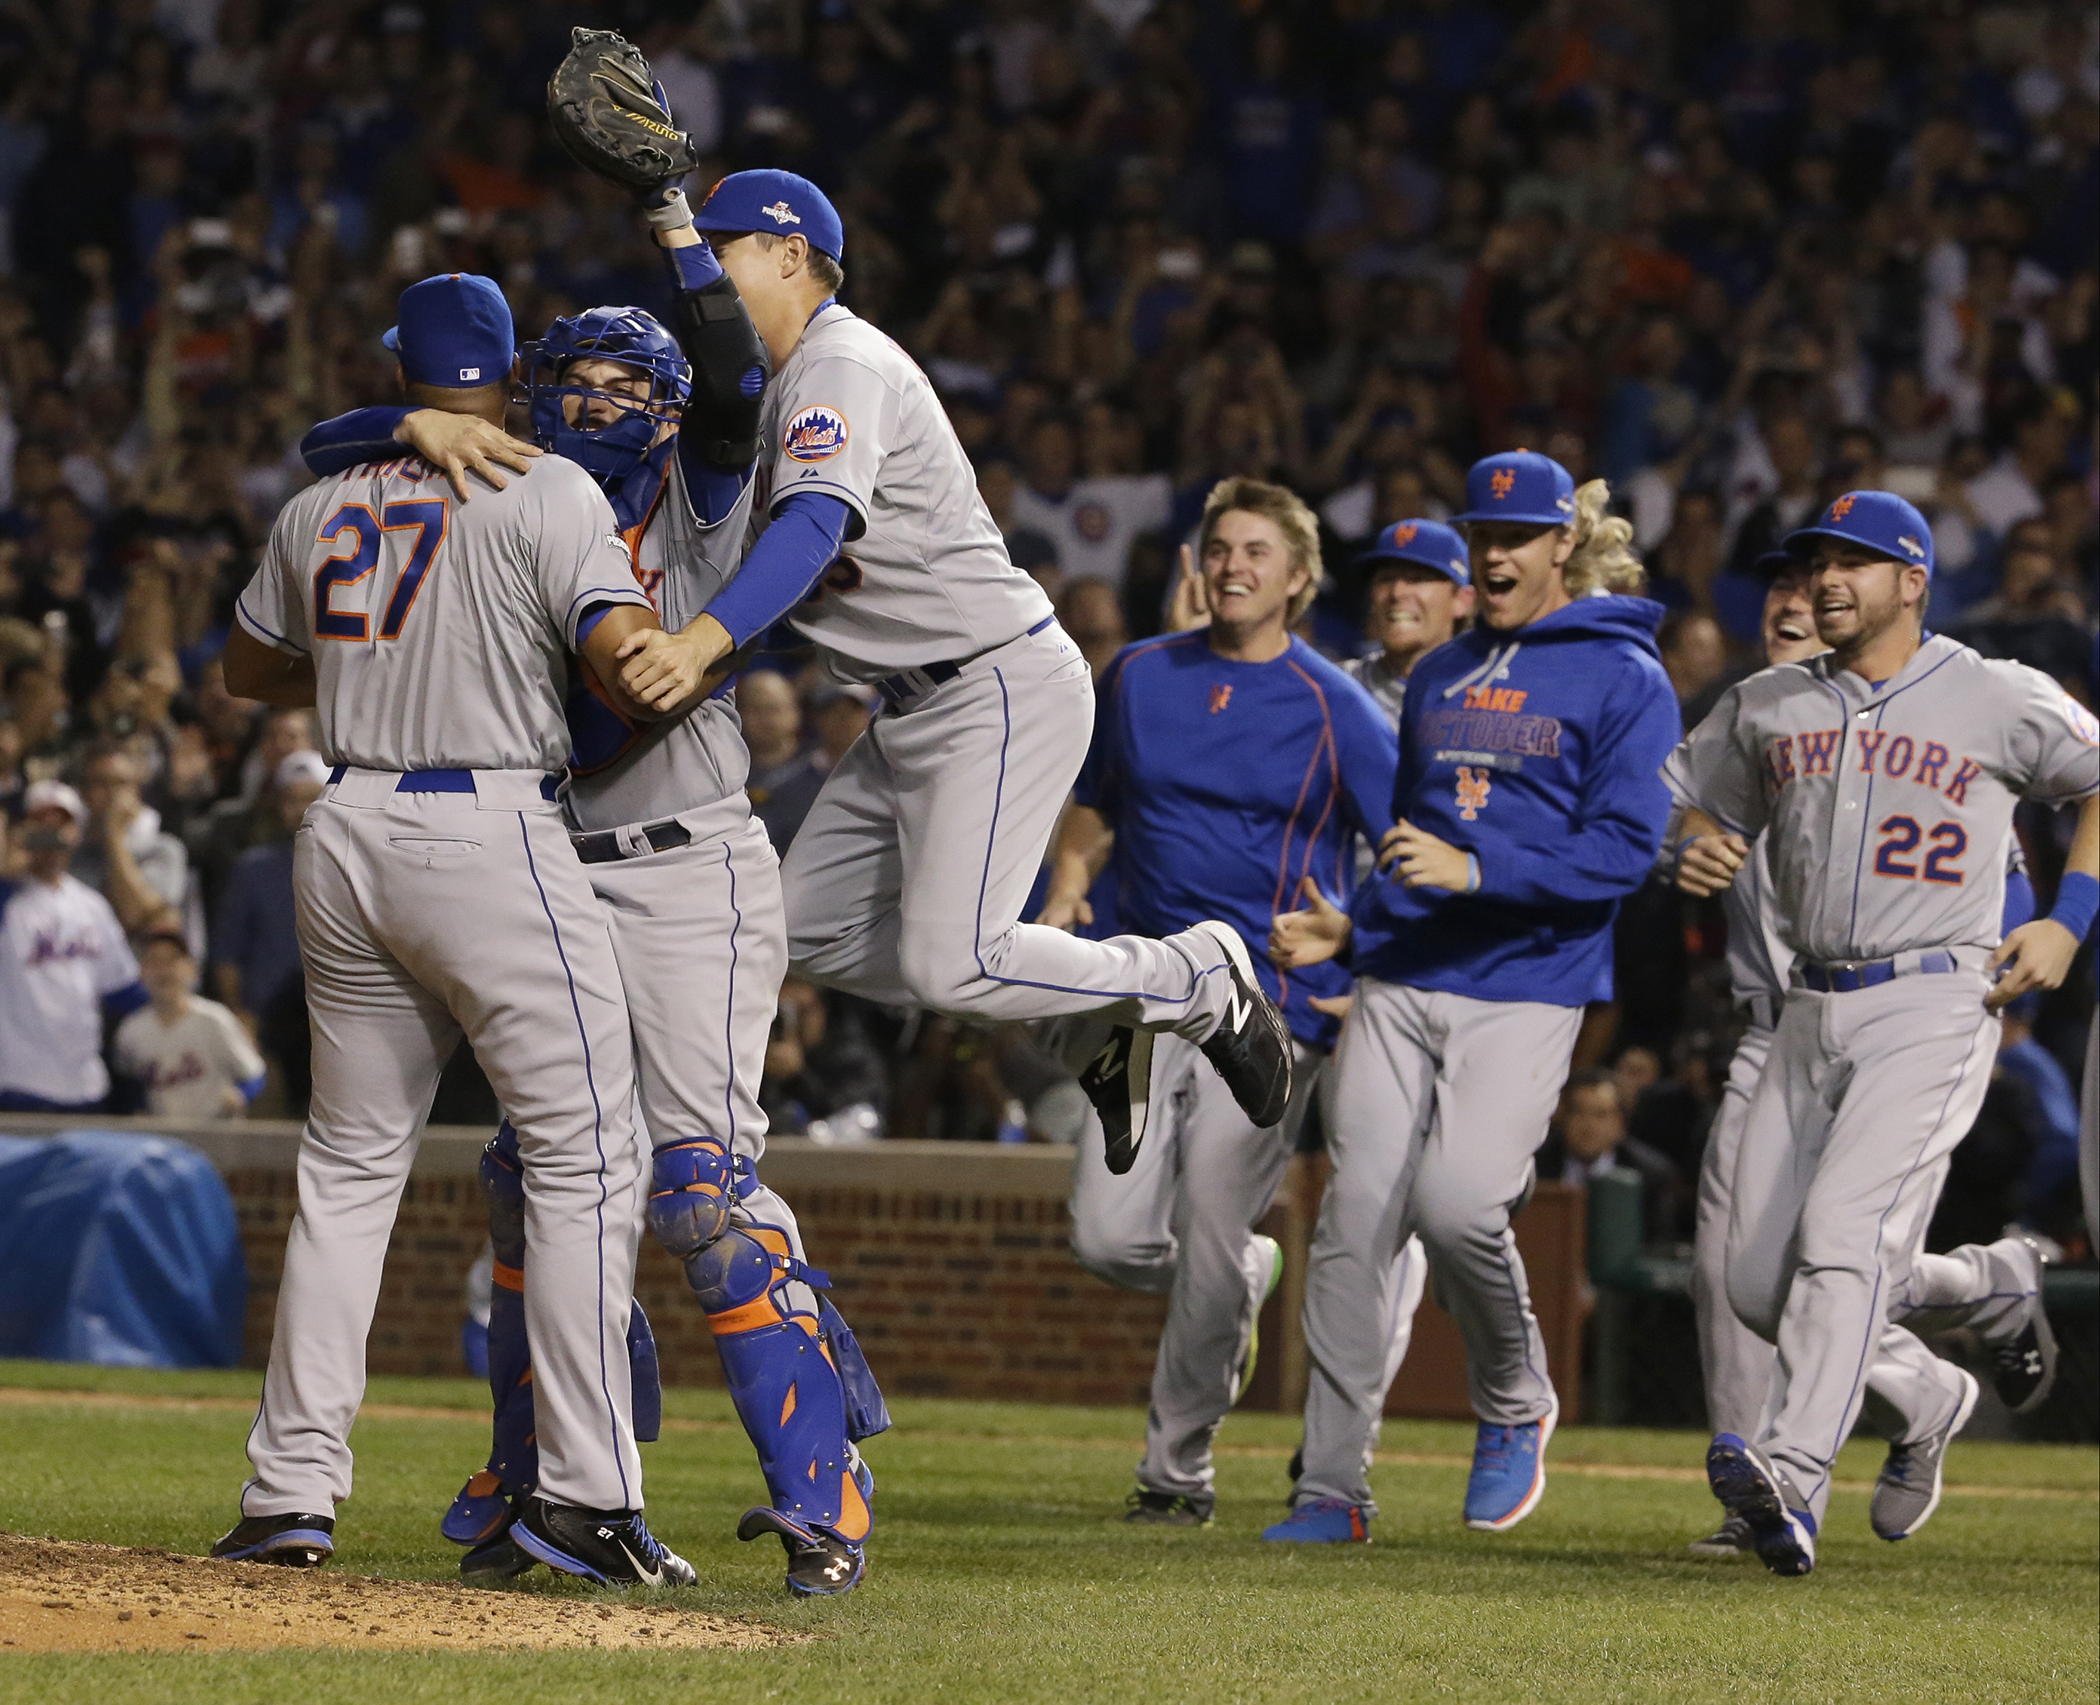 The New York Mets are headed to the World Series (!)